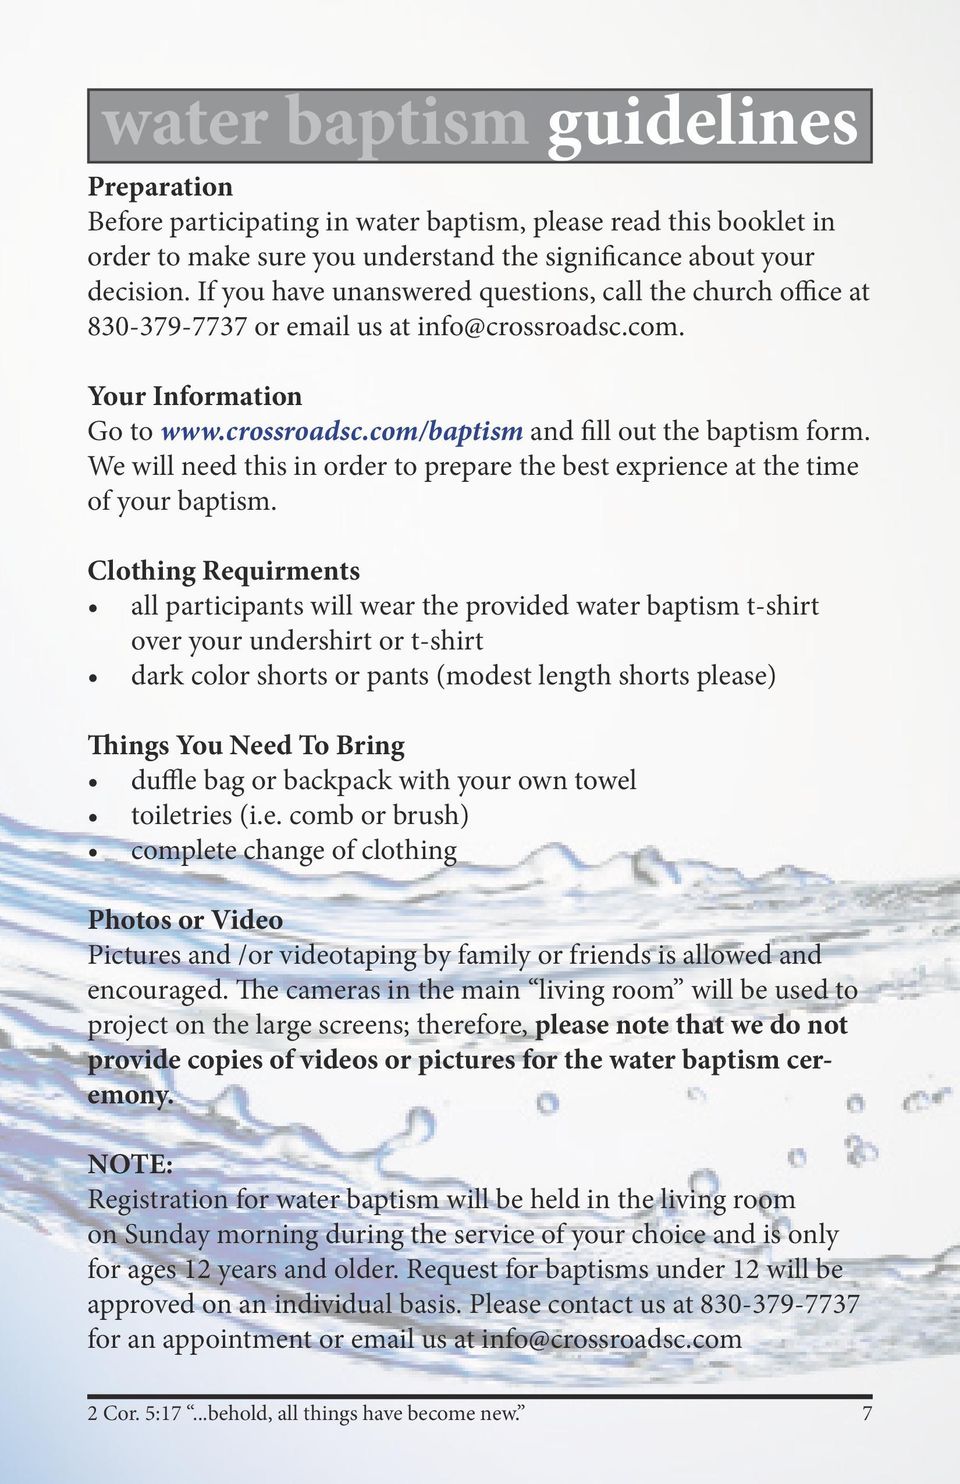 We will need this in order to prepare the best exprience at the time of your baptism.